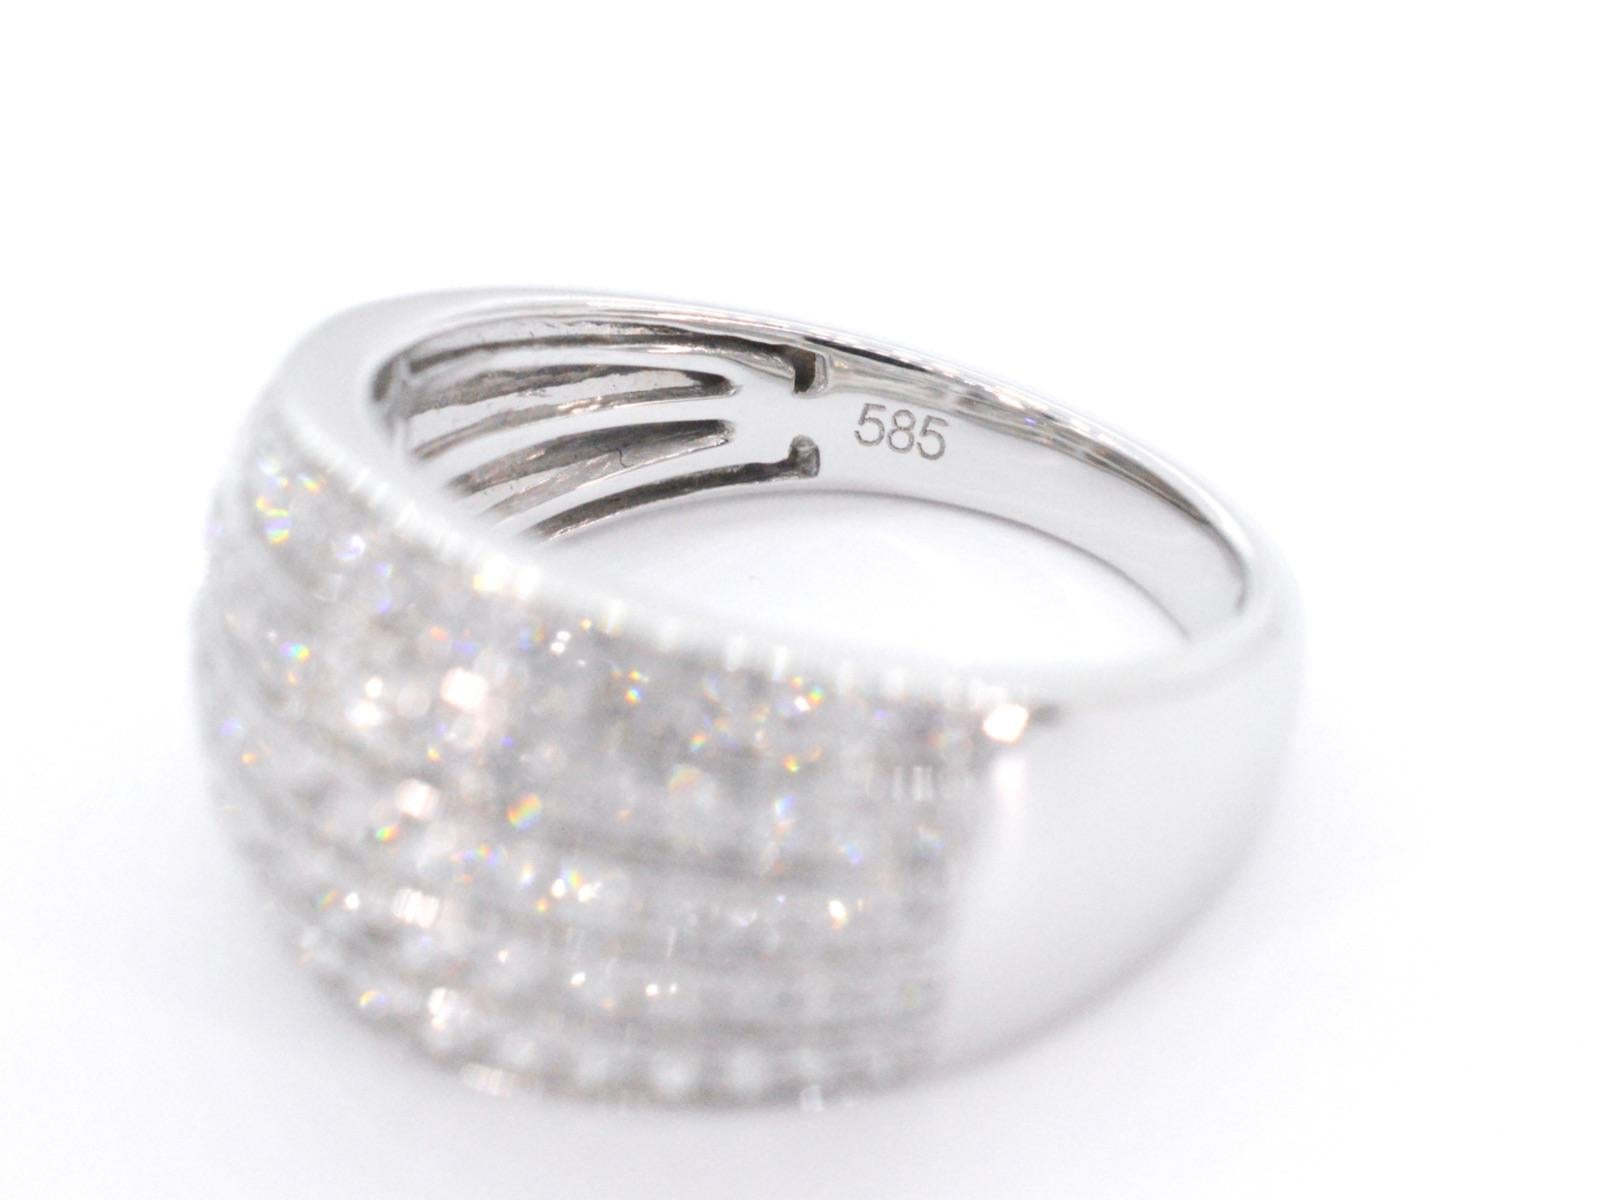 Women's White Gold Ring with Diamonds 1.00 Carat For Sale